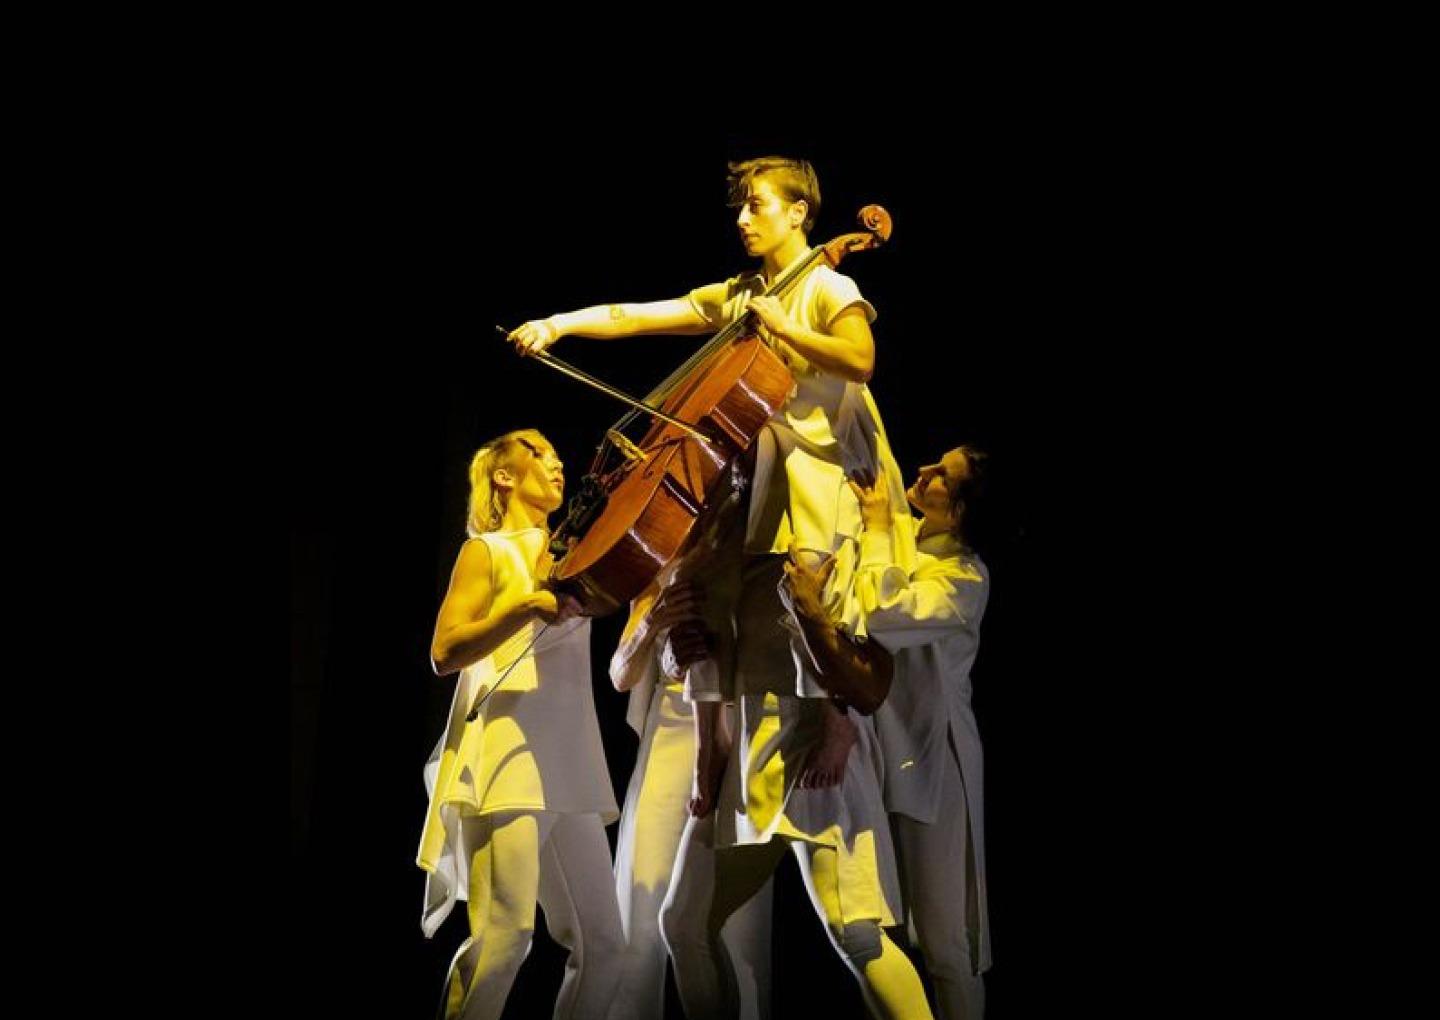 Lily Gelfand, BFA ’18, pictured here playing her cello, is a core dancer at David Dorfman Dance, a dance accompanist at The Juilliard School and a yoga teacher in New York City. Photo provided by Lily Gelfand